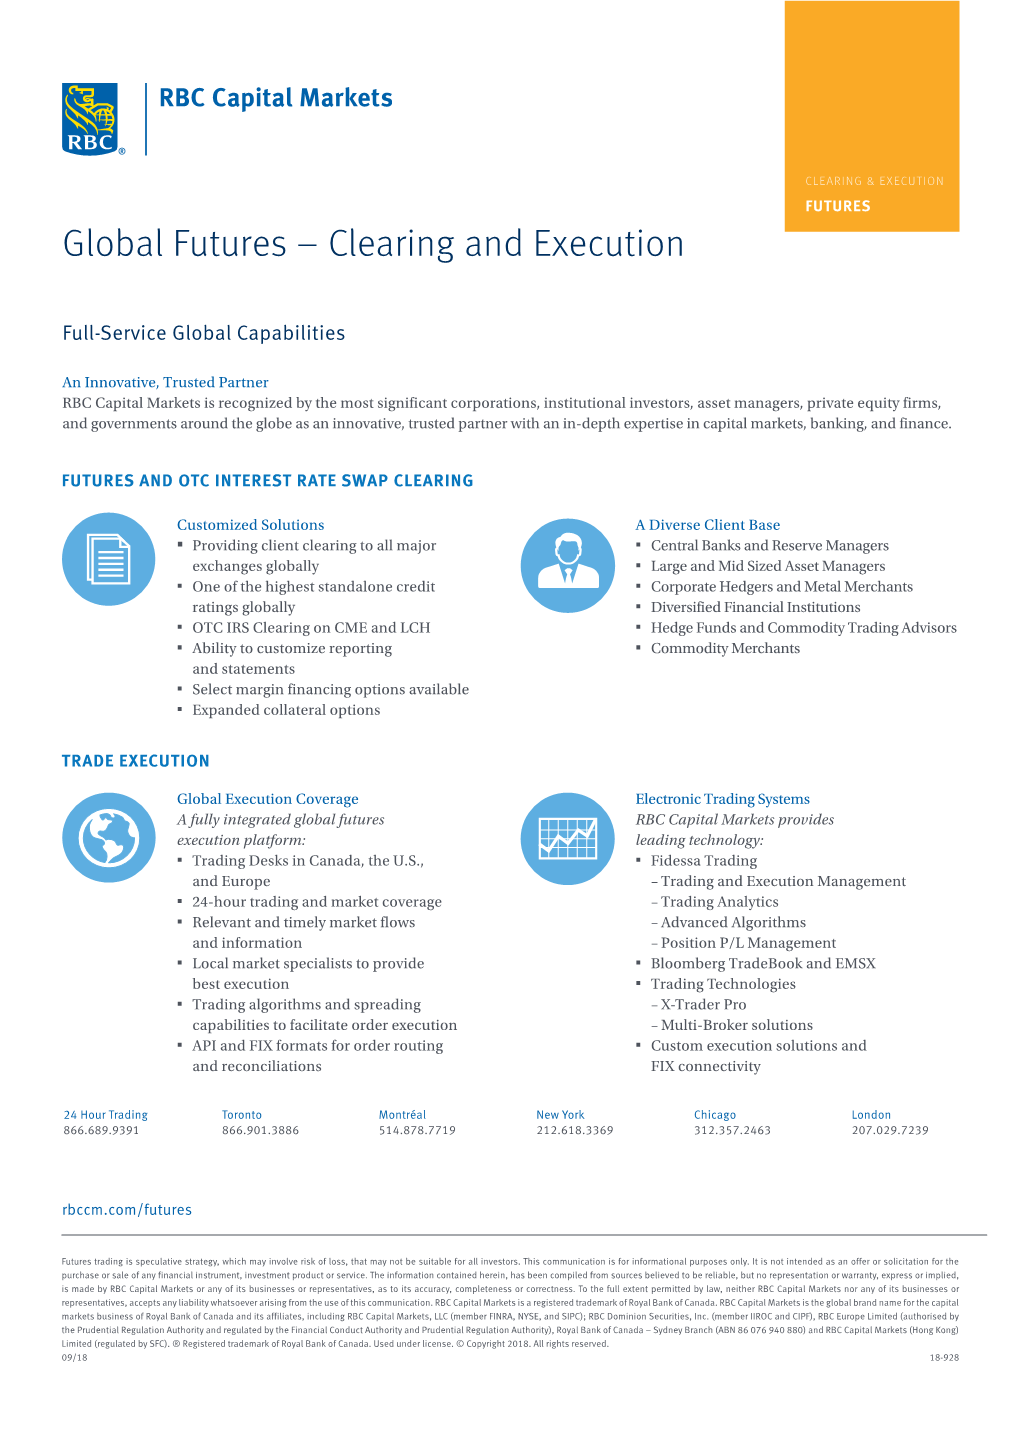 Global Futures – Clearing and Execution